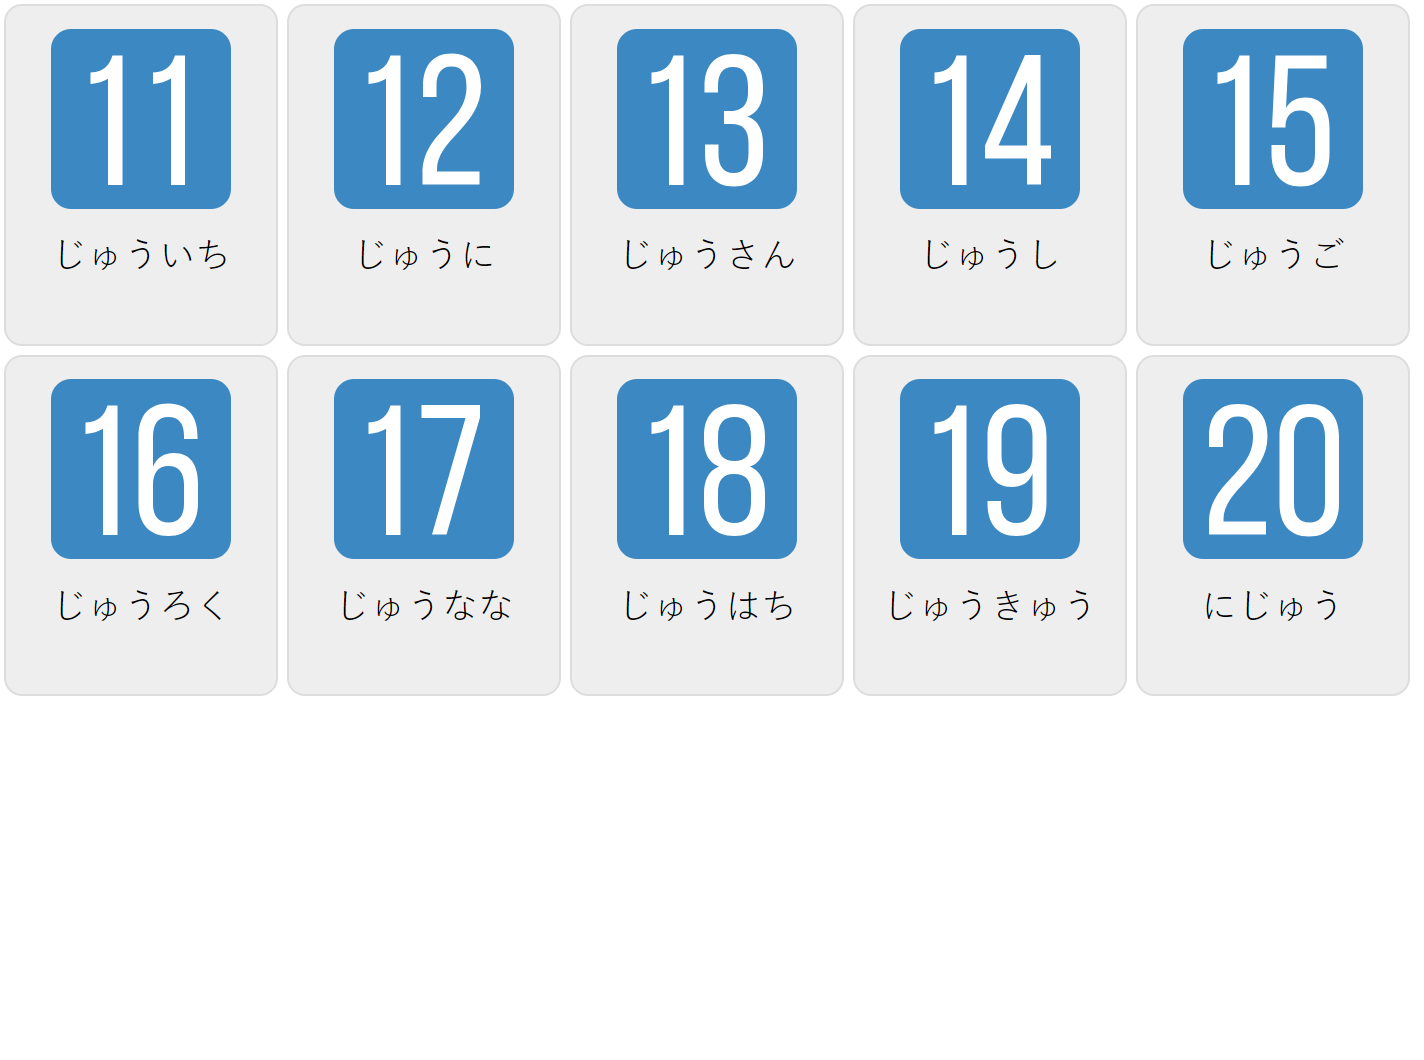 Numbers 11-20 in Japanese